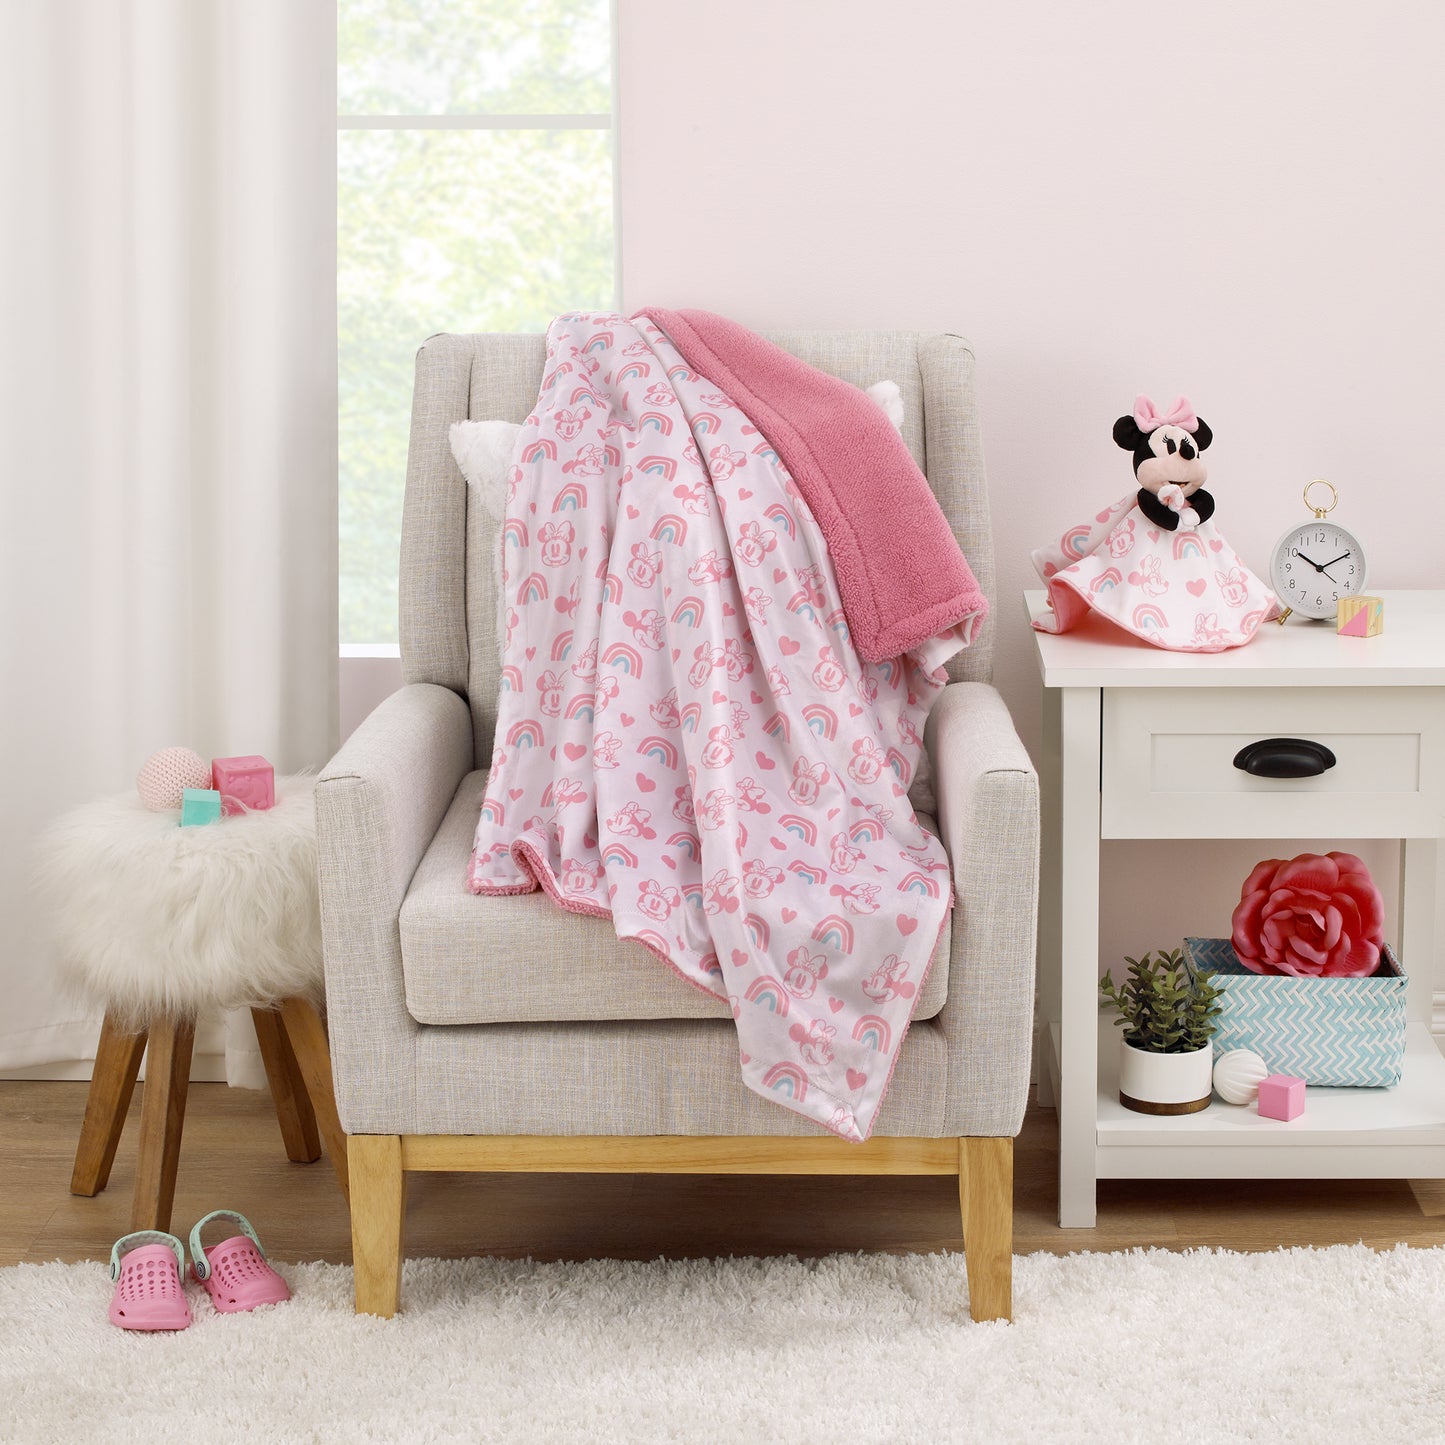 Disney Minnie Mouse White, Pink, and Aqua Rainbows and Hearts Super Soft Sherpa Baby Blanket and Security Blanket 2-Piece Gift Set